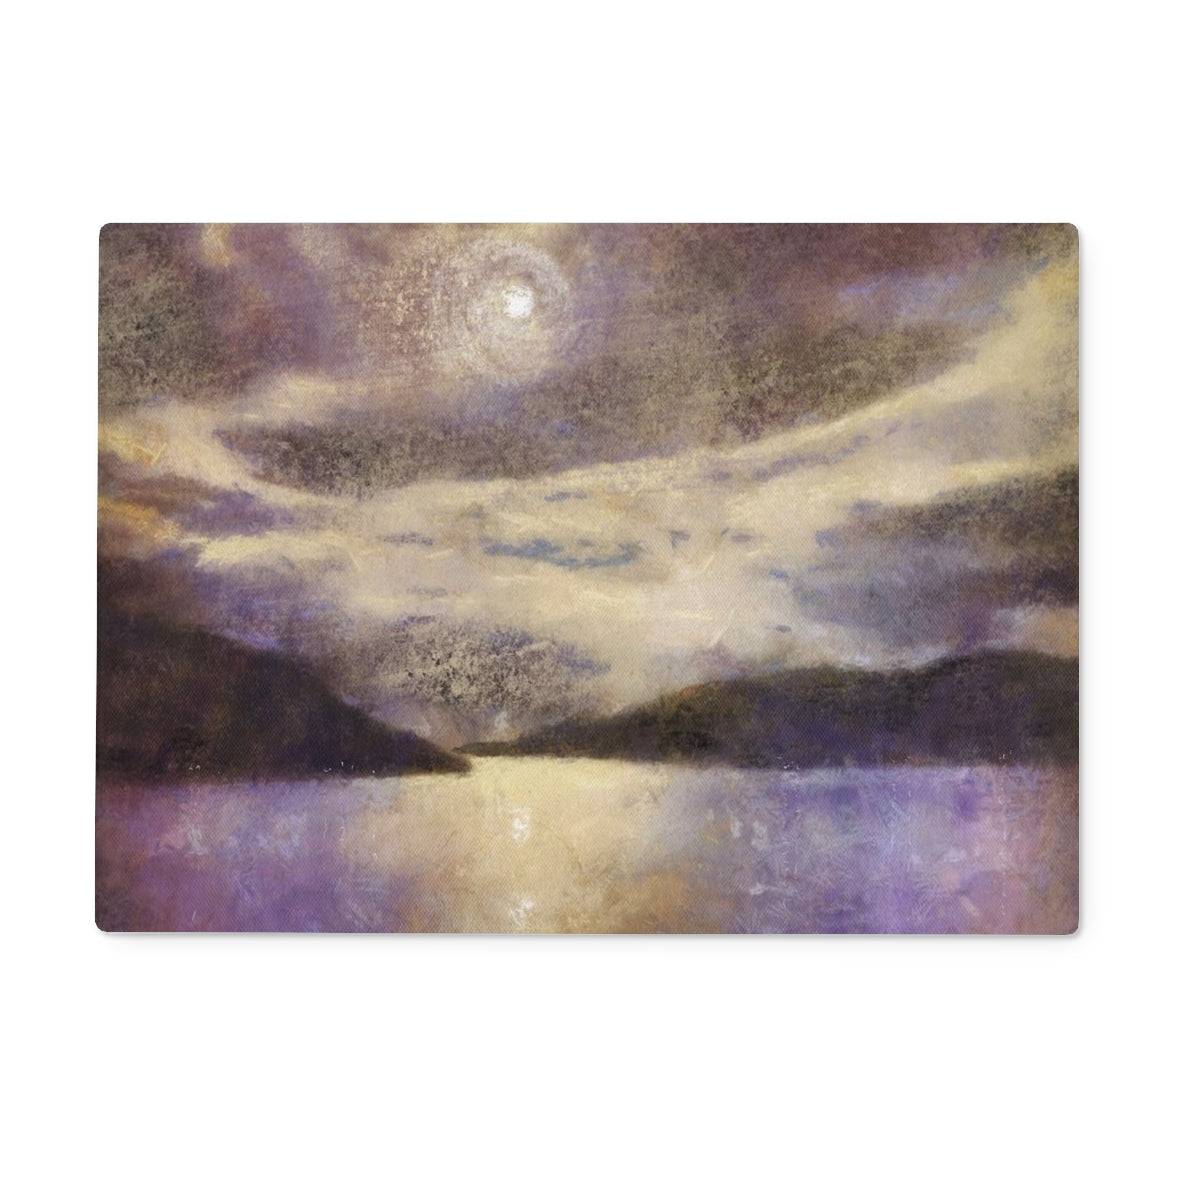 Moonlight Meets Lewis & Harris Art Gifts Glass Chopping Board-Glass Chopping Boards-Hebridean Islands Art Gallery-15"x11" Rectangular-Paintings, Prints, Homeware, Art Gifts From Scotland By Scottish Artist Kevin Hunter